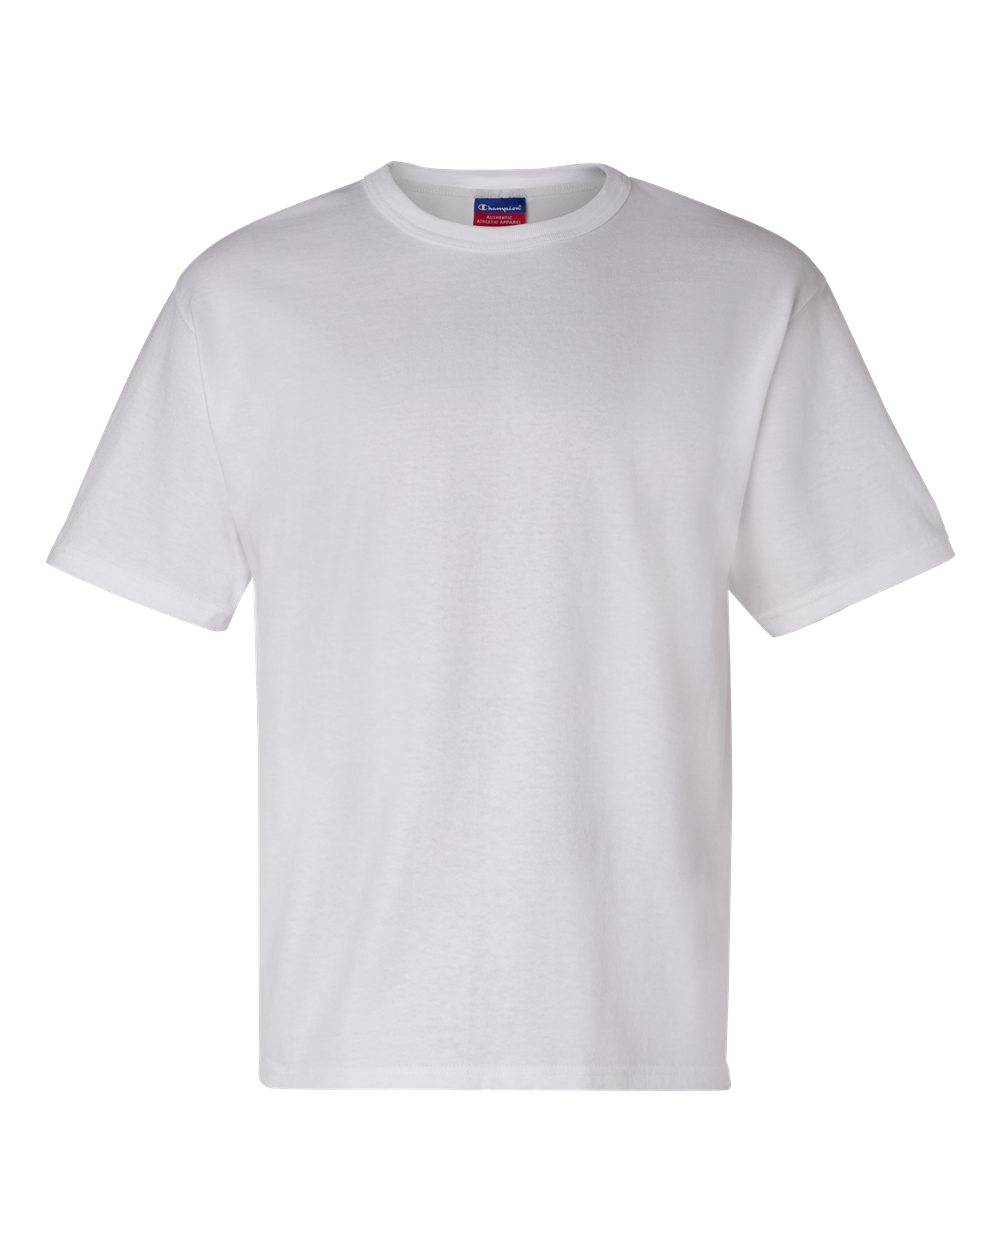 Cotton Heritage Jersey T Shirt Tee T105 